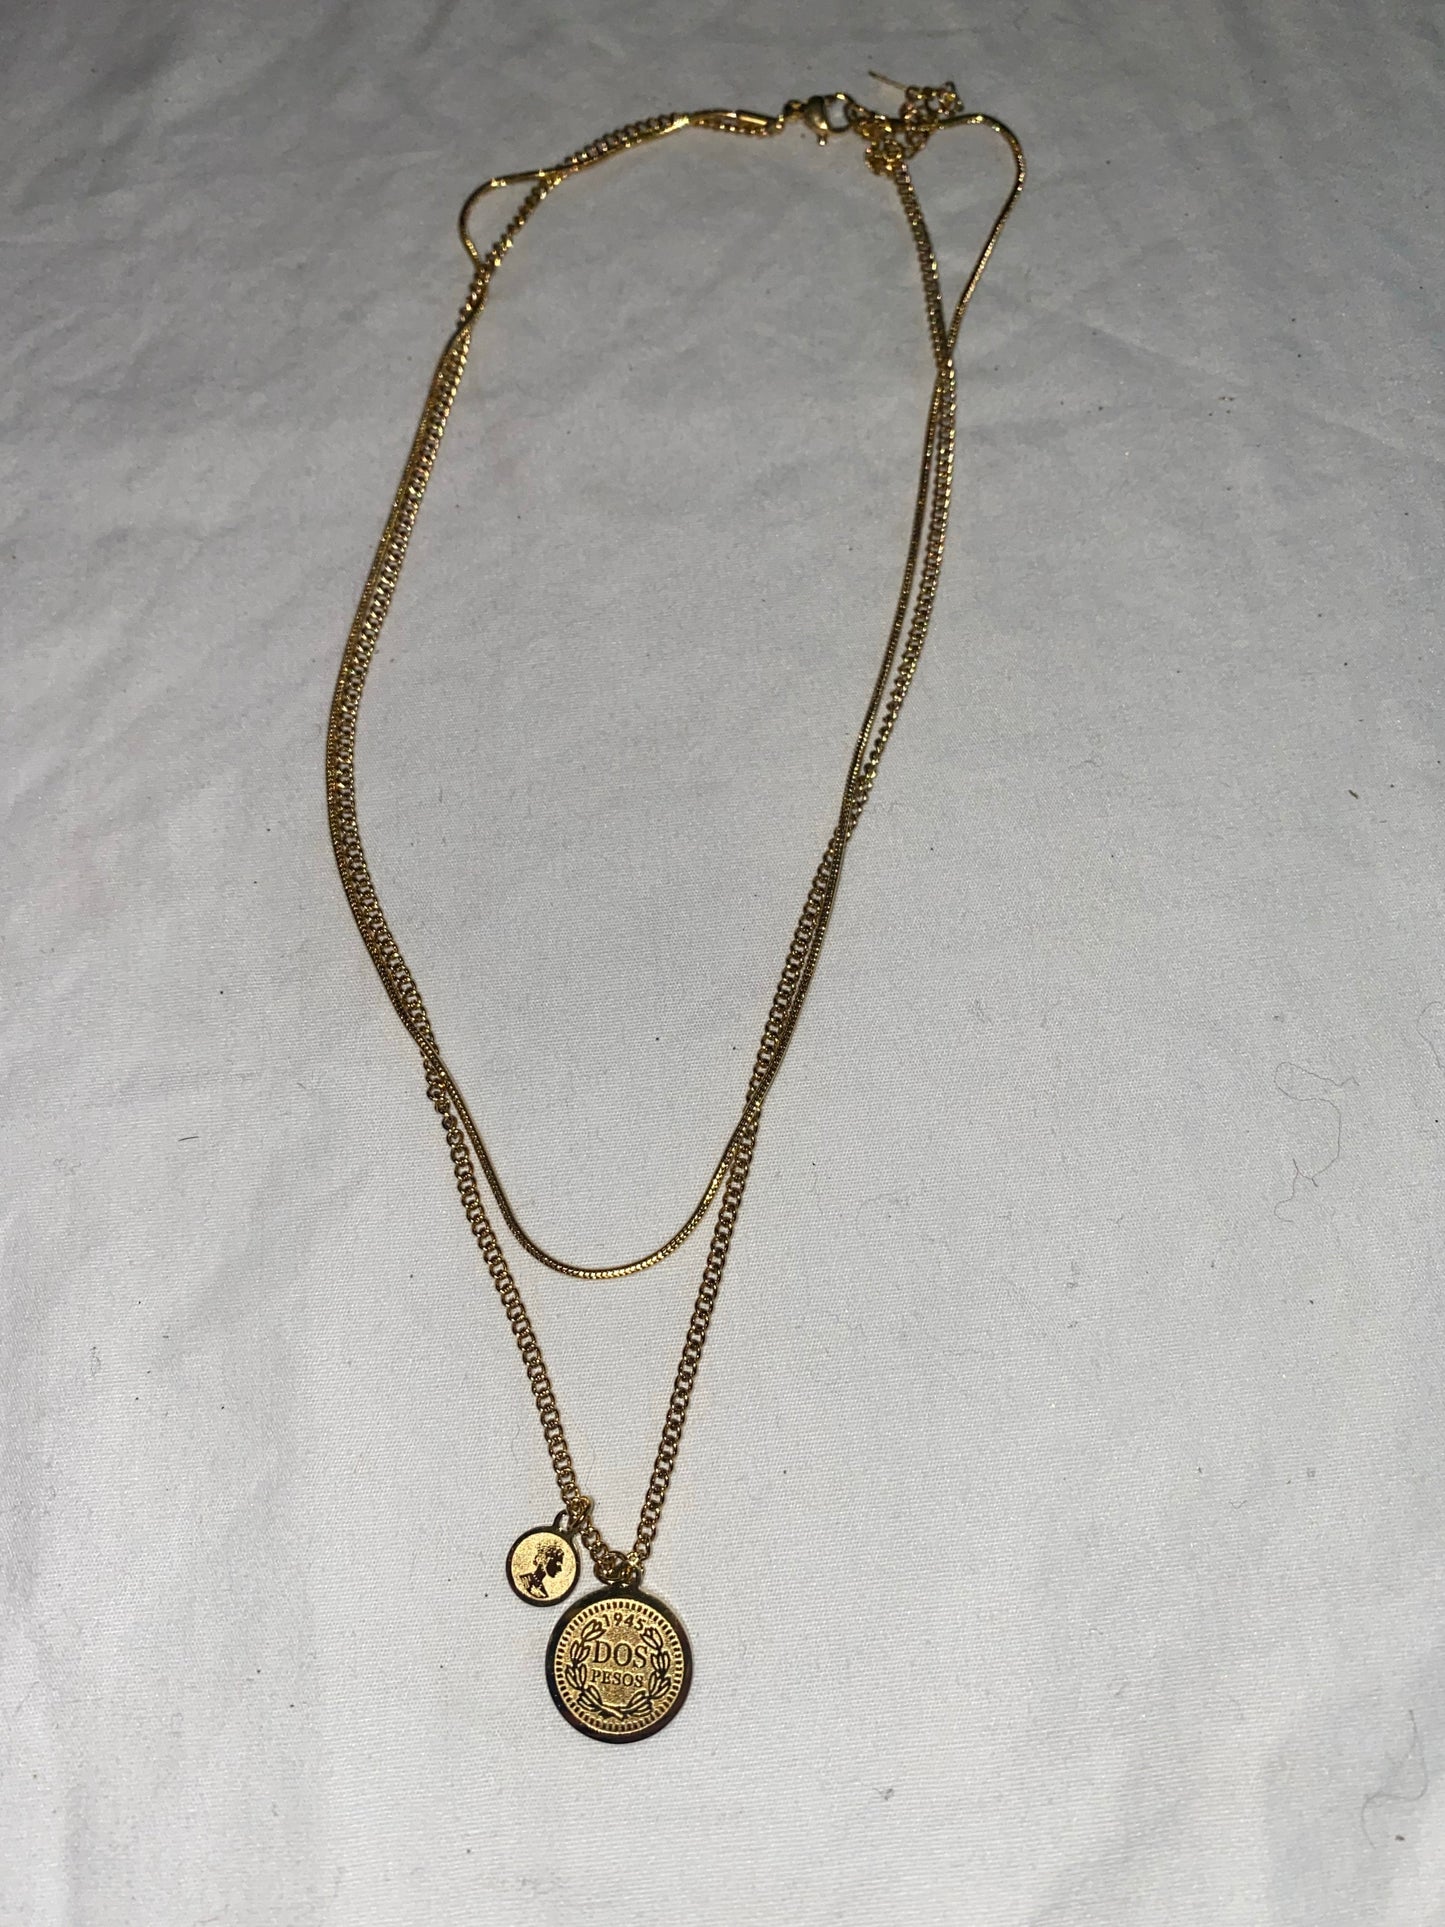 2 layer necklace